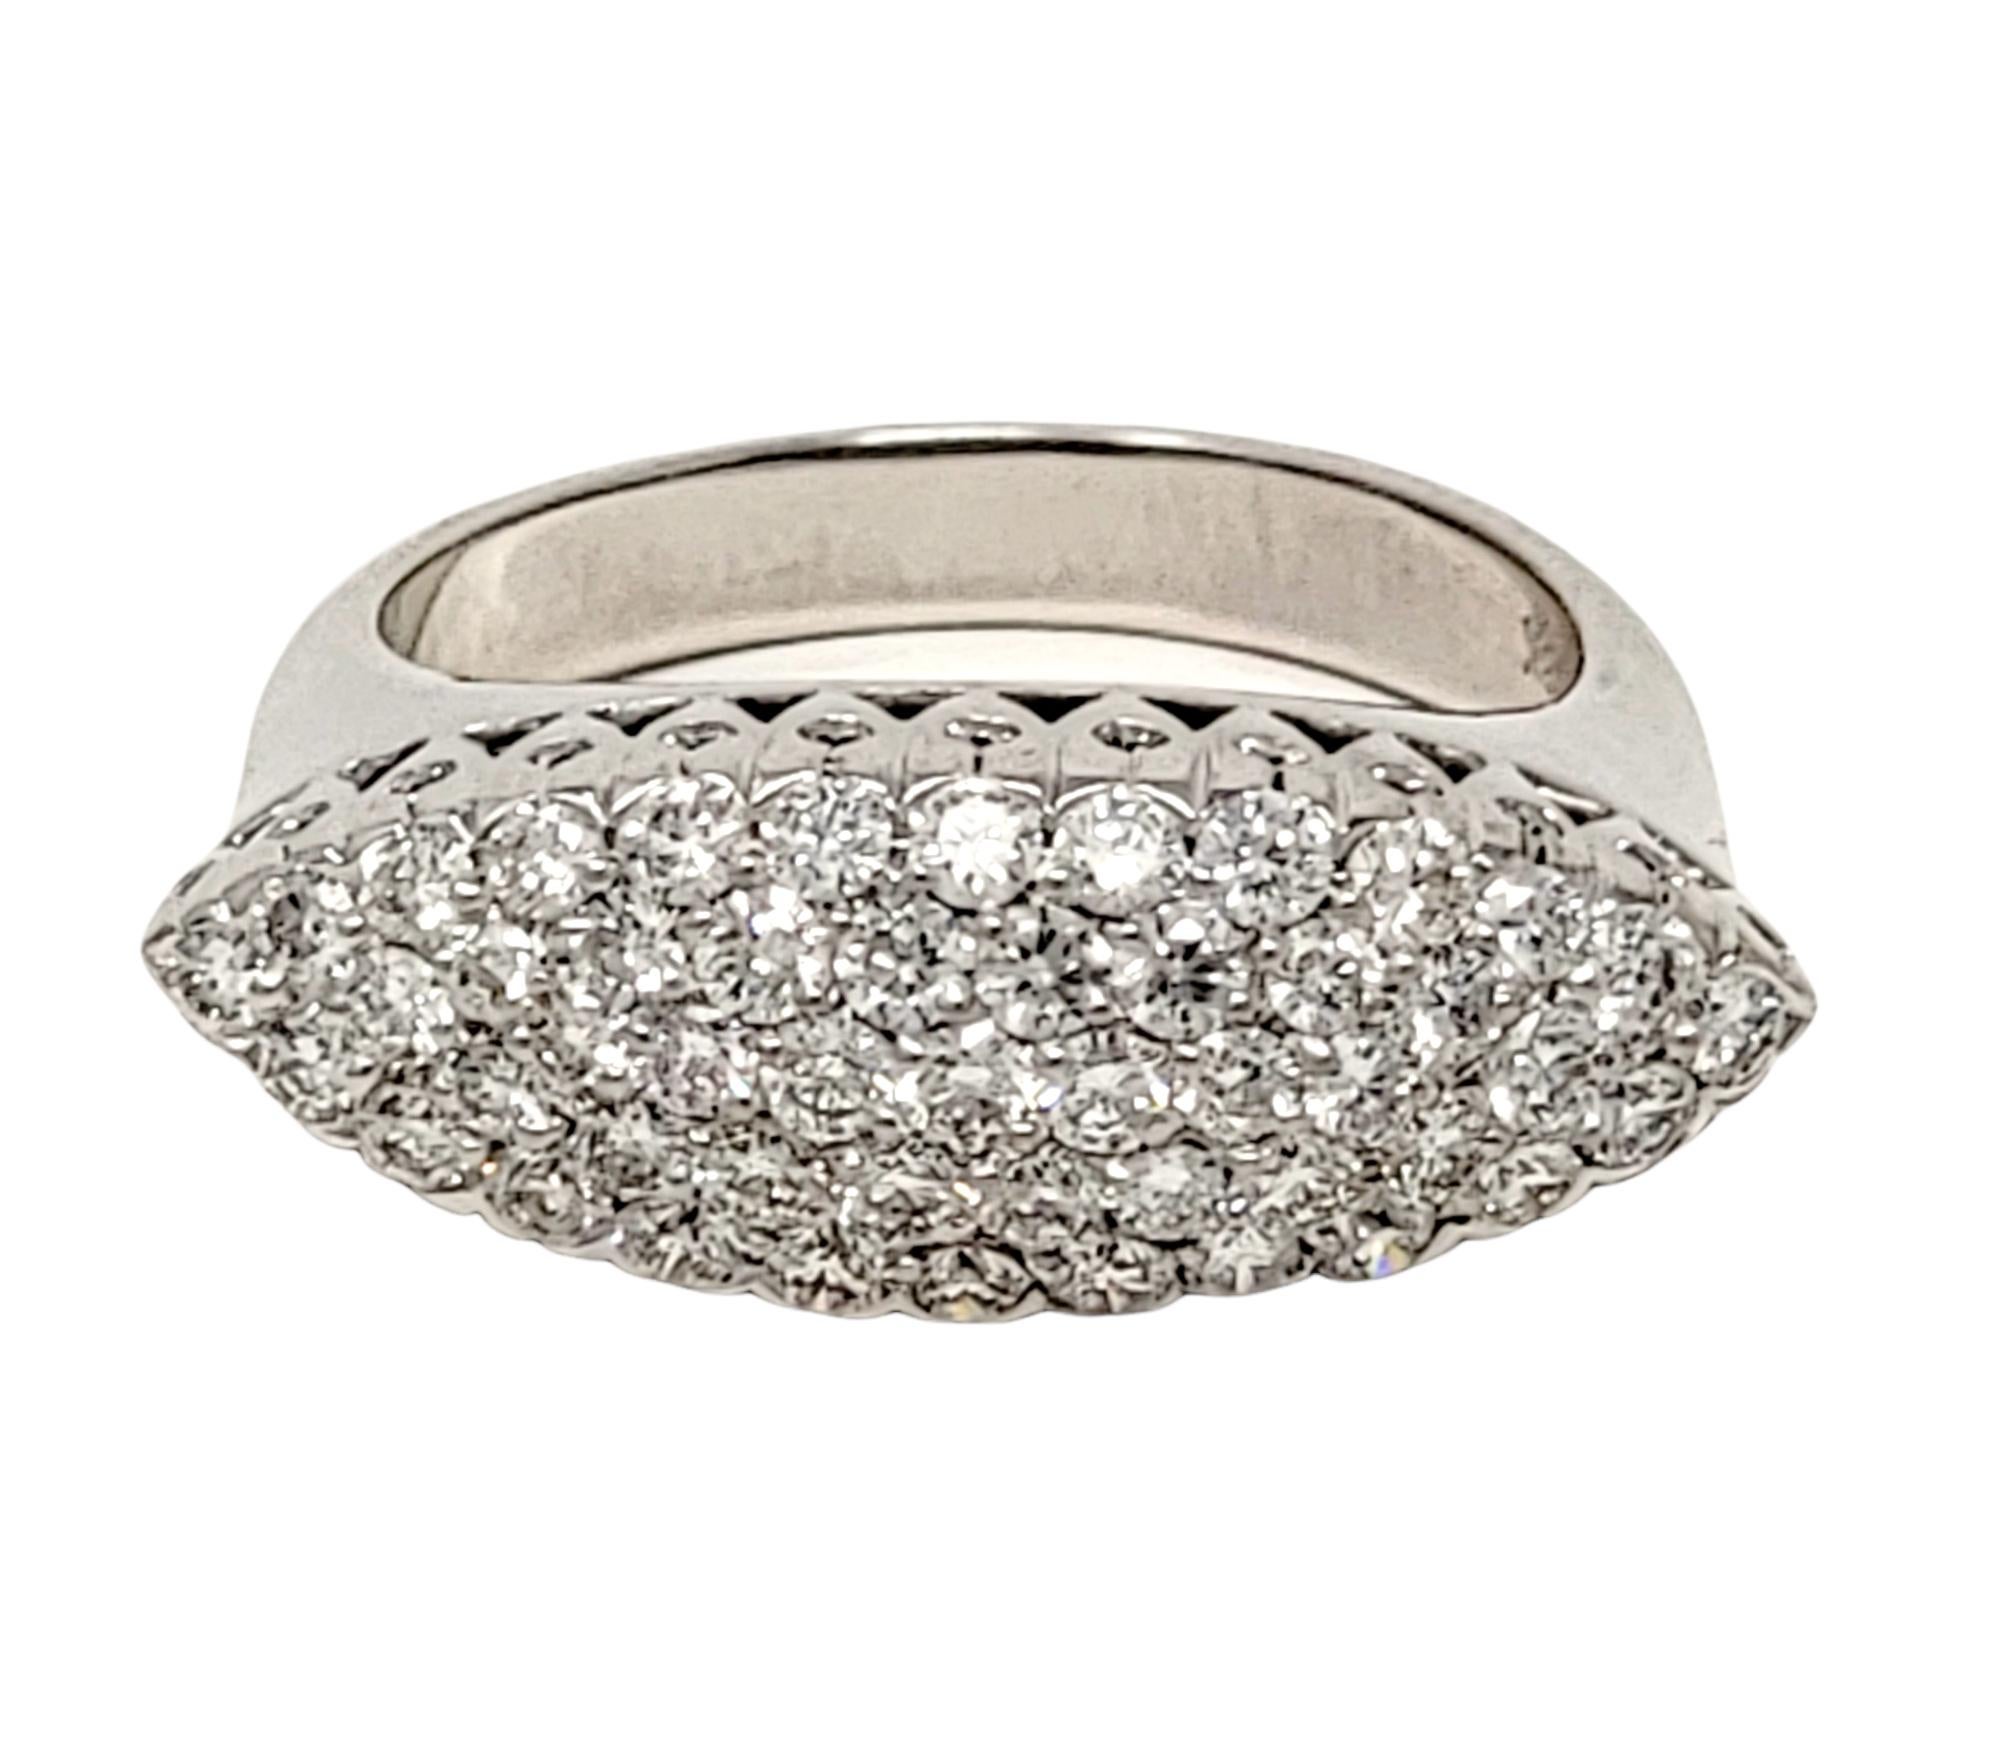 Ring size: 7.25

Sleek, contemporary pave diamond band ring perfect for everyday wear. 

Ring size: 7.25
Weight: 7.56 grams
Metal: 18 Karat White Gold
Natural Diamonds: 1.00 ctw 
Diamond cut: Round Brilliant
Diamond color: E-F
Diamond clarity: